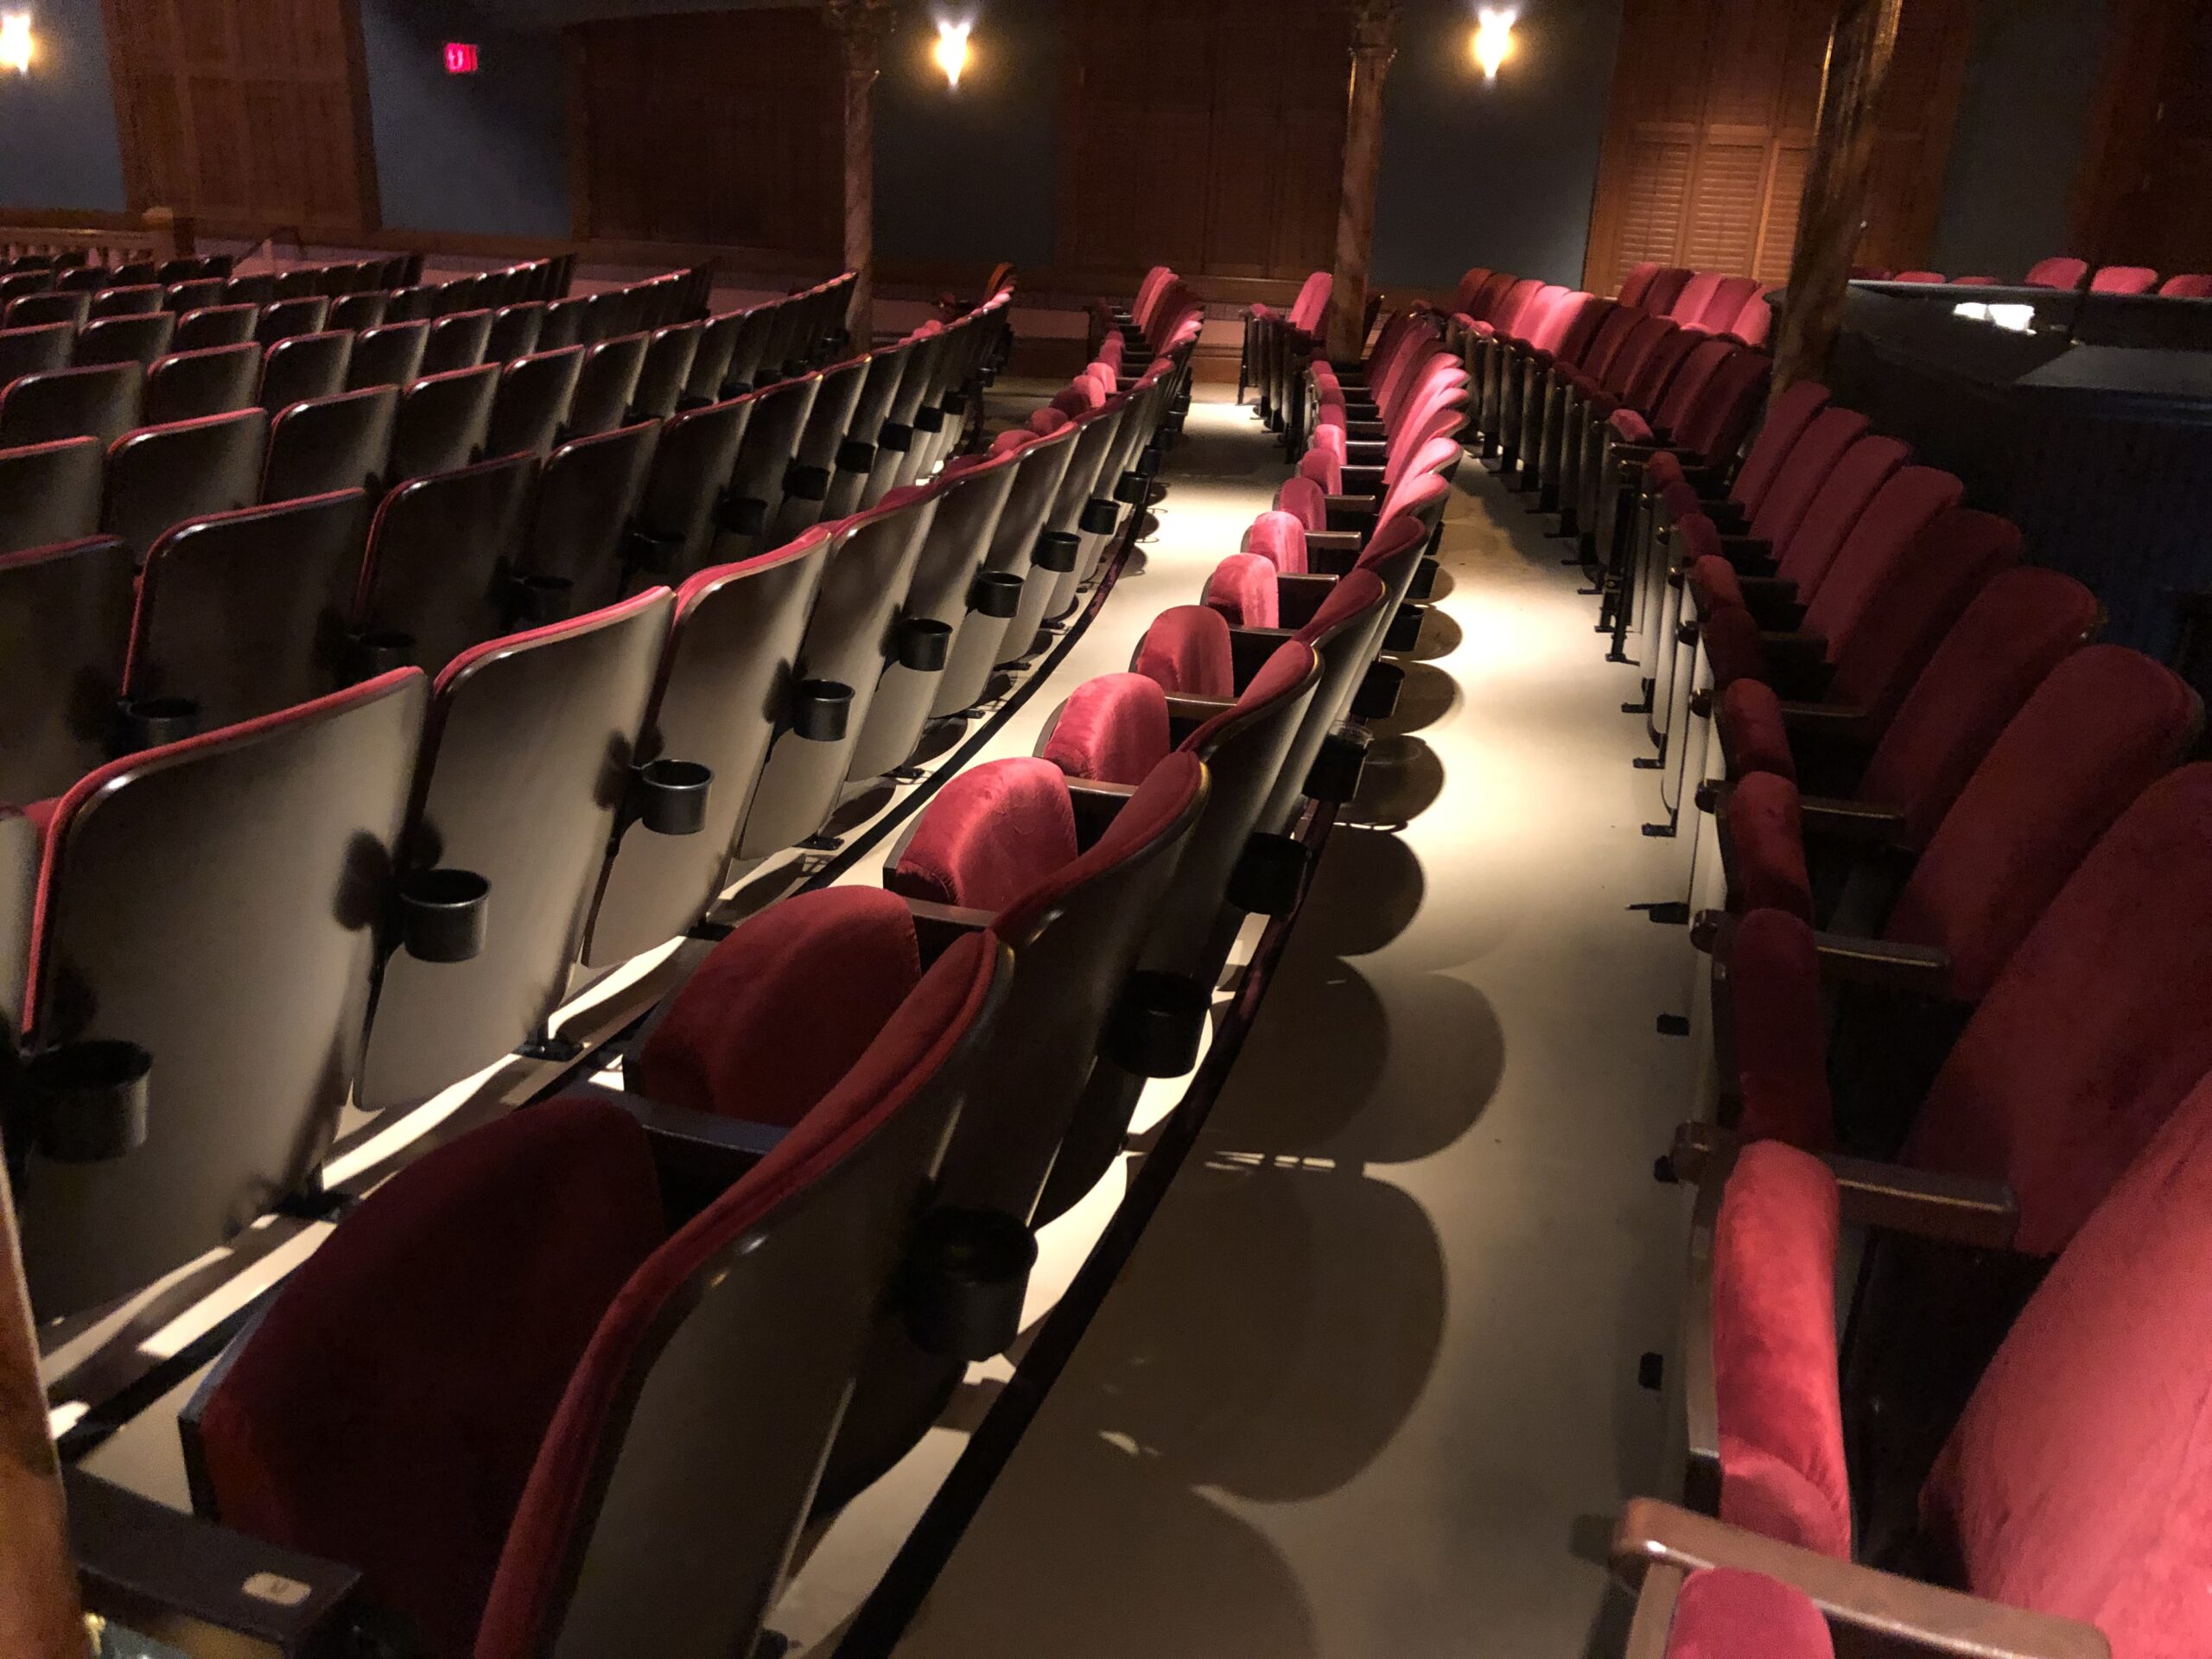 A Night at the Movies… with Hearing Loss